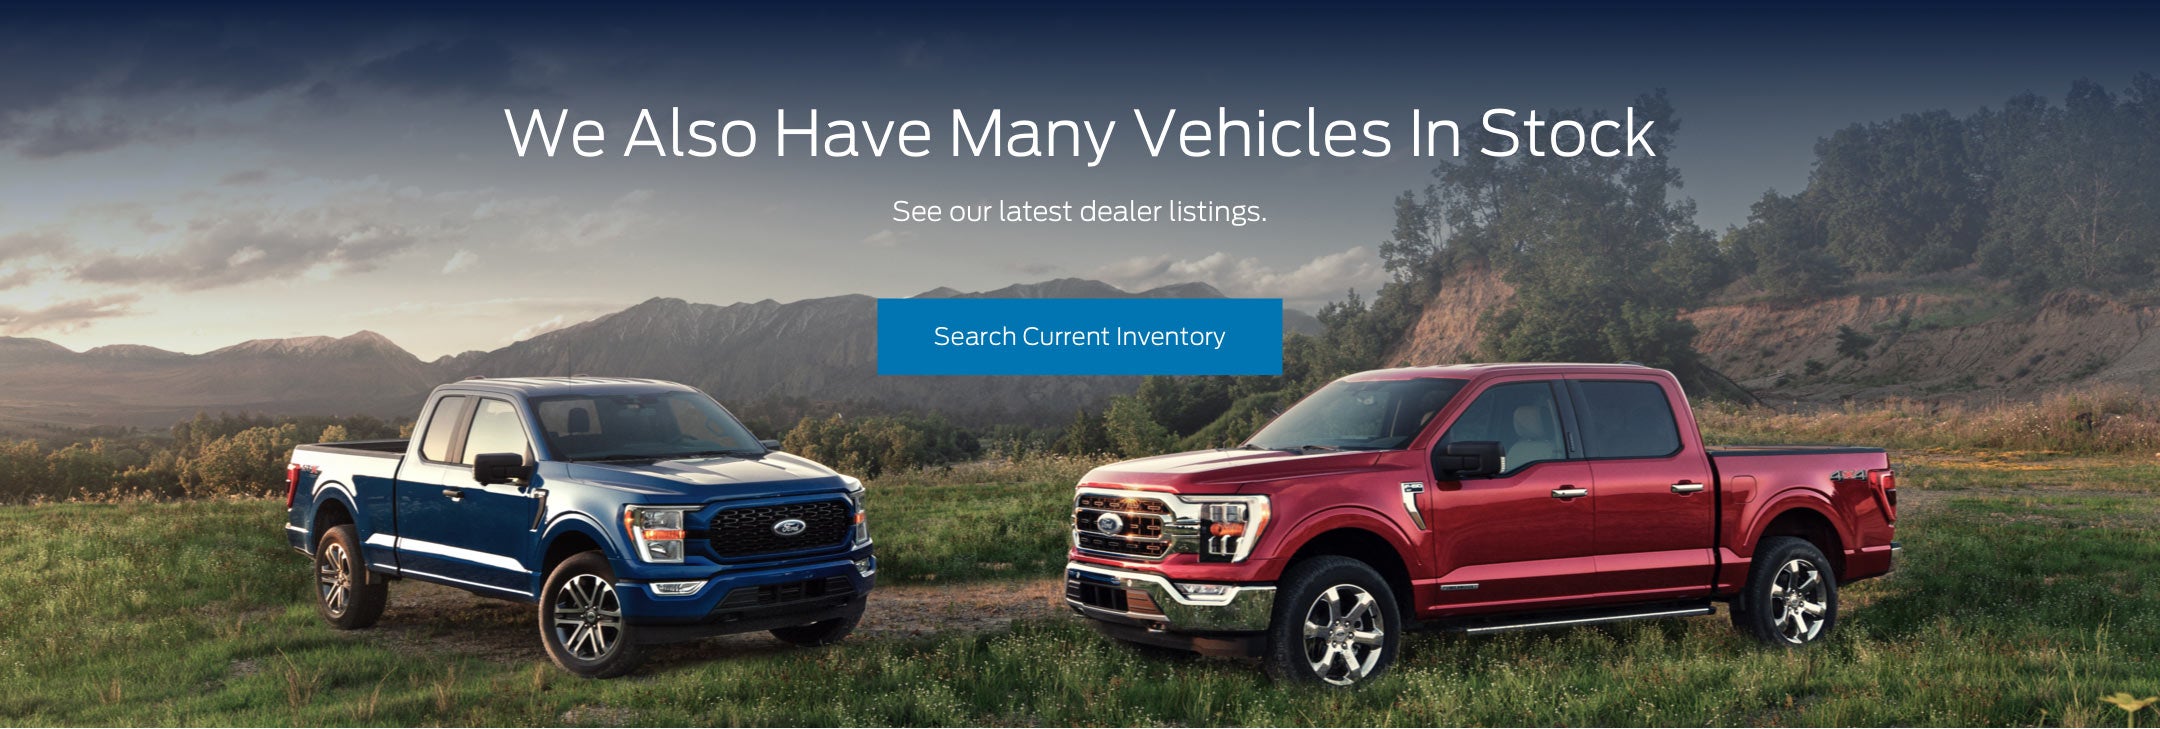 Ford vehicles in stock | Jansen Ford of Breese in Breese IL